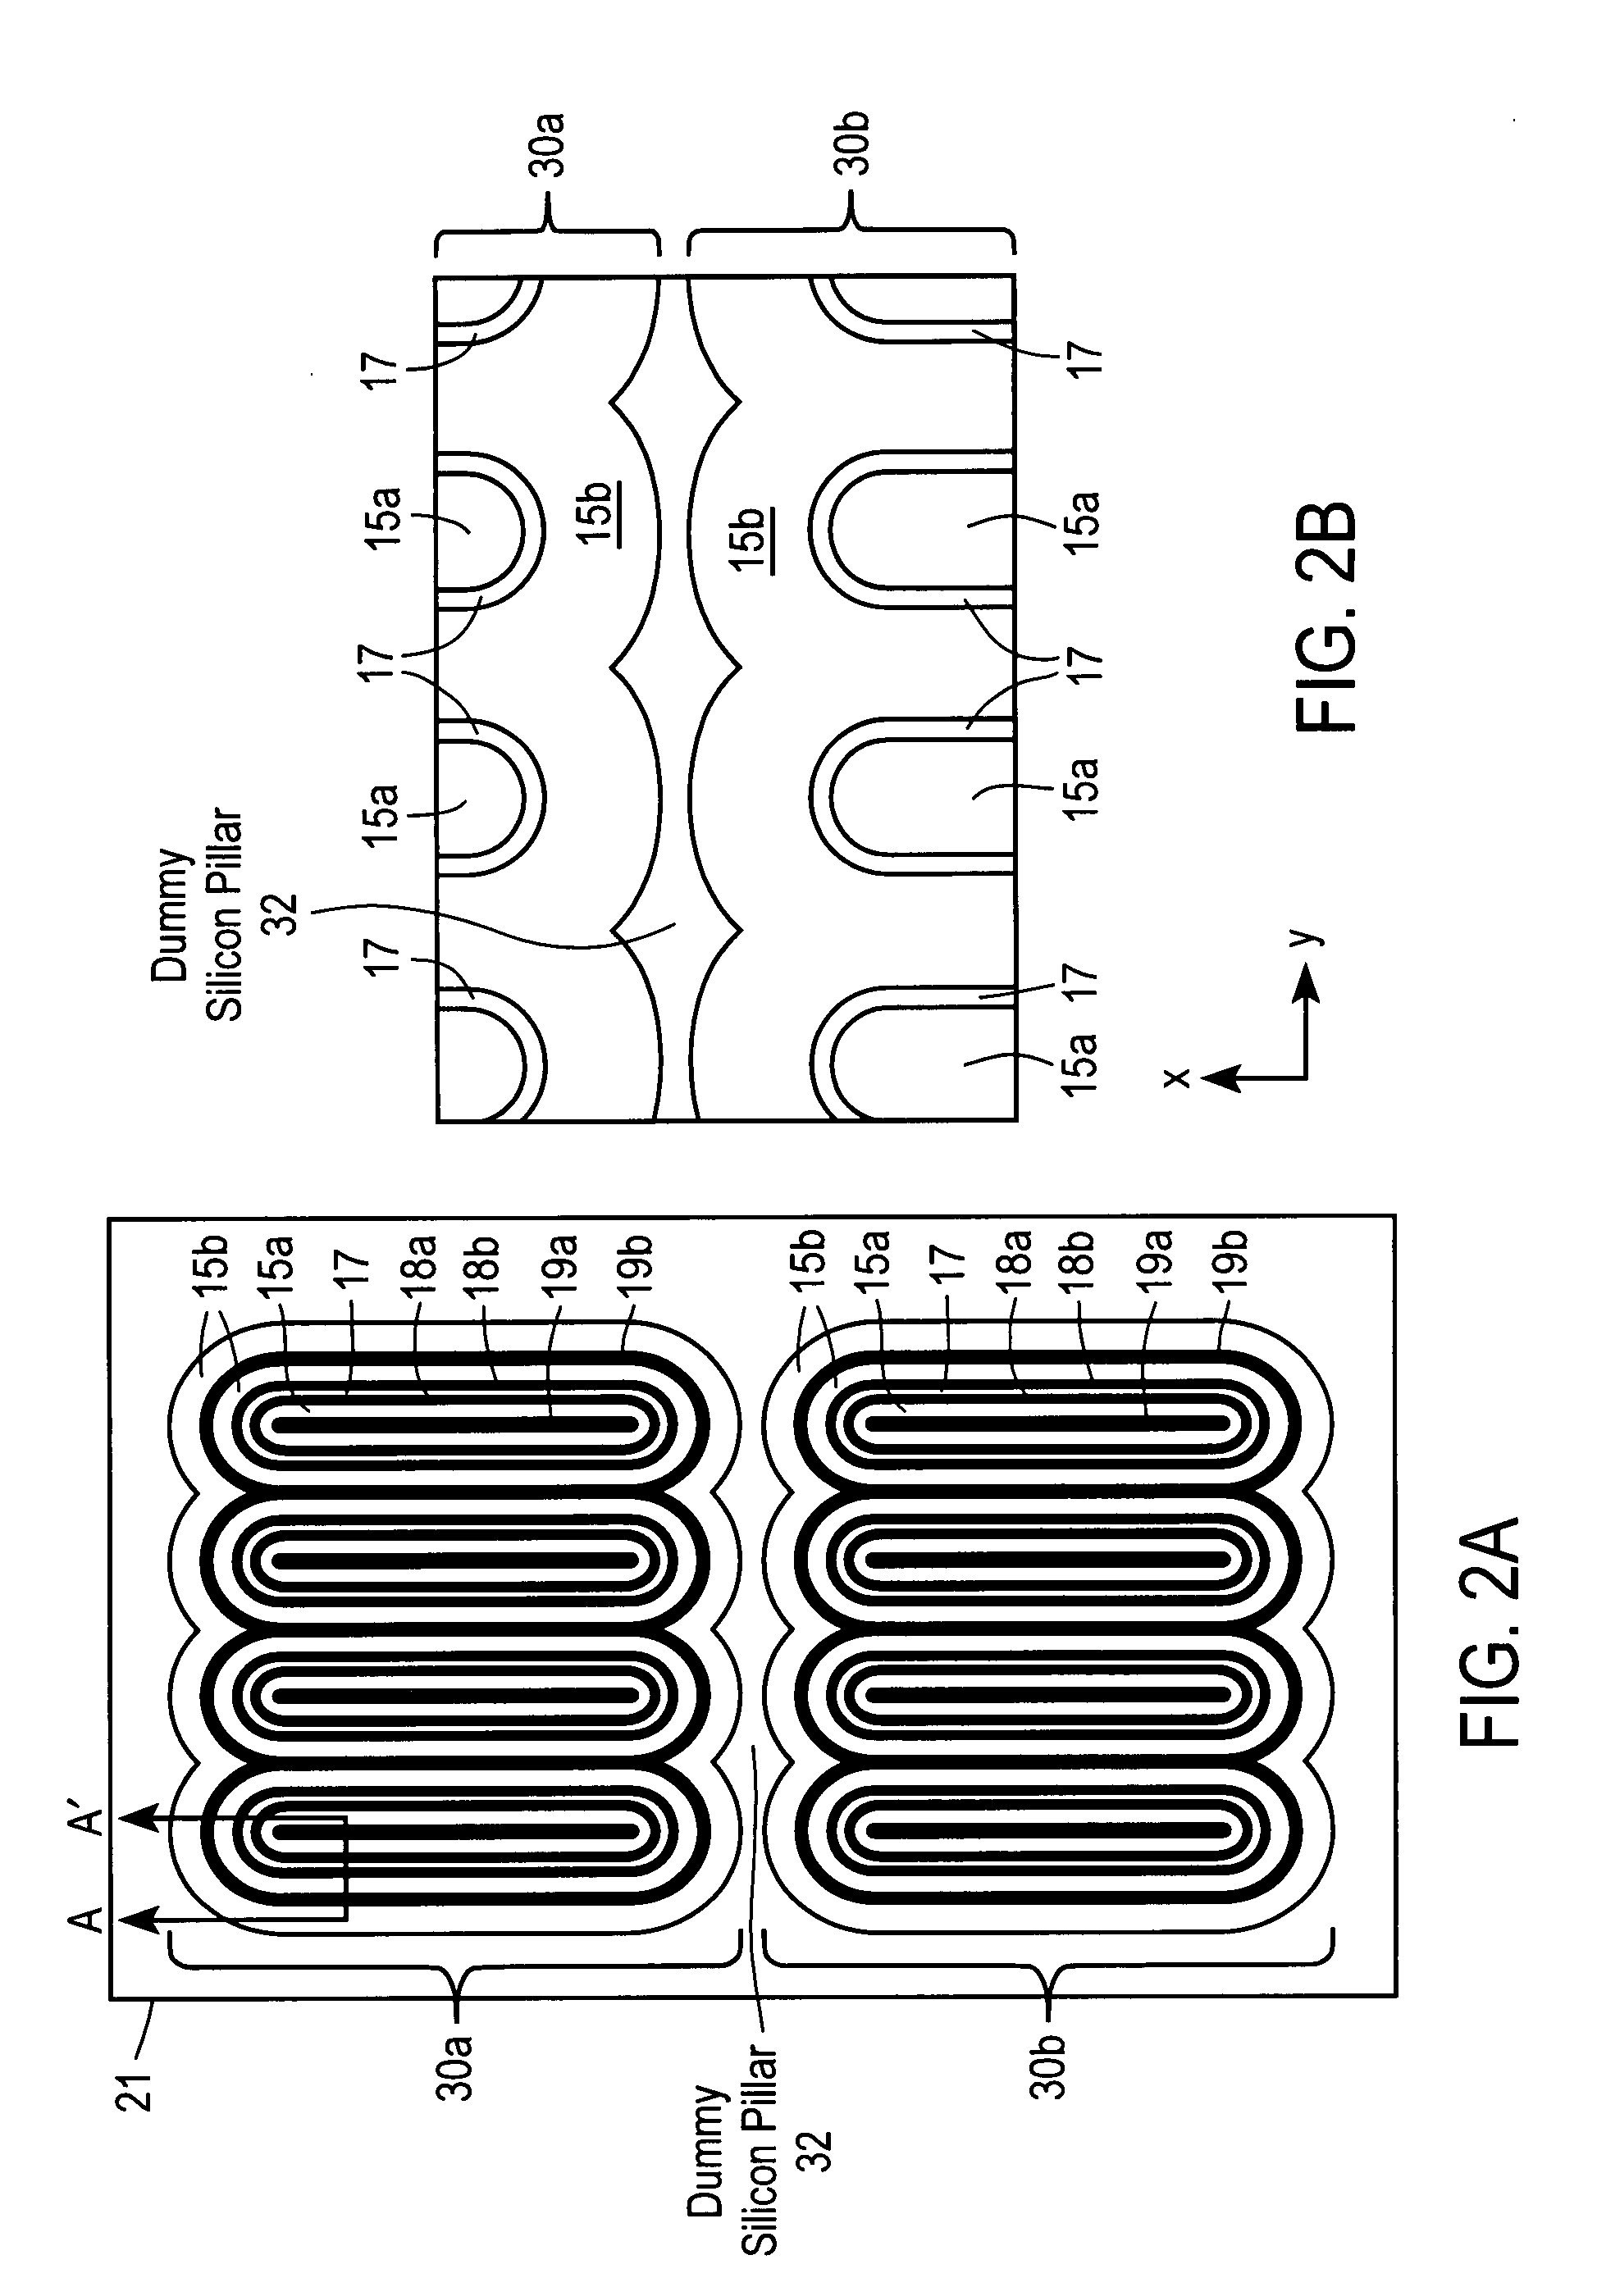 Gate pullback at ends of high-voltage vertical transistor structure